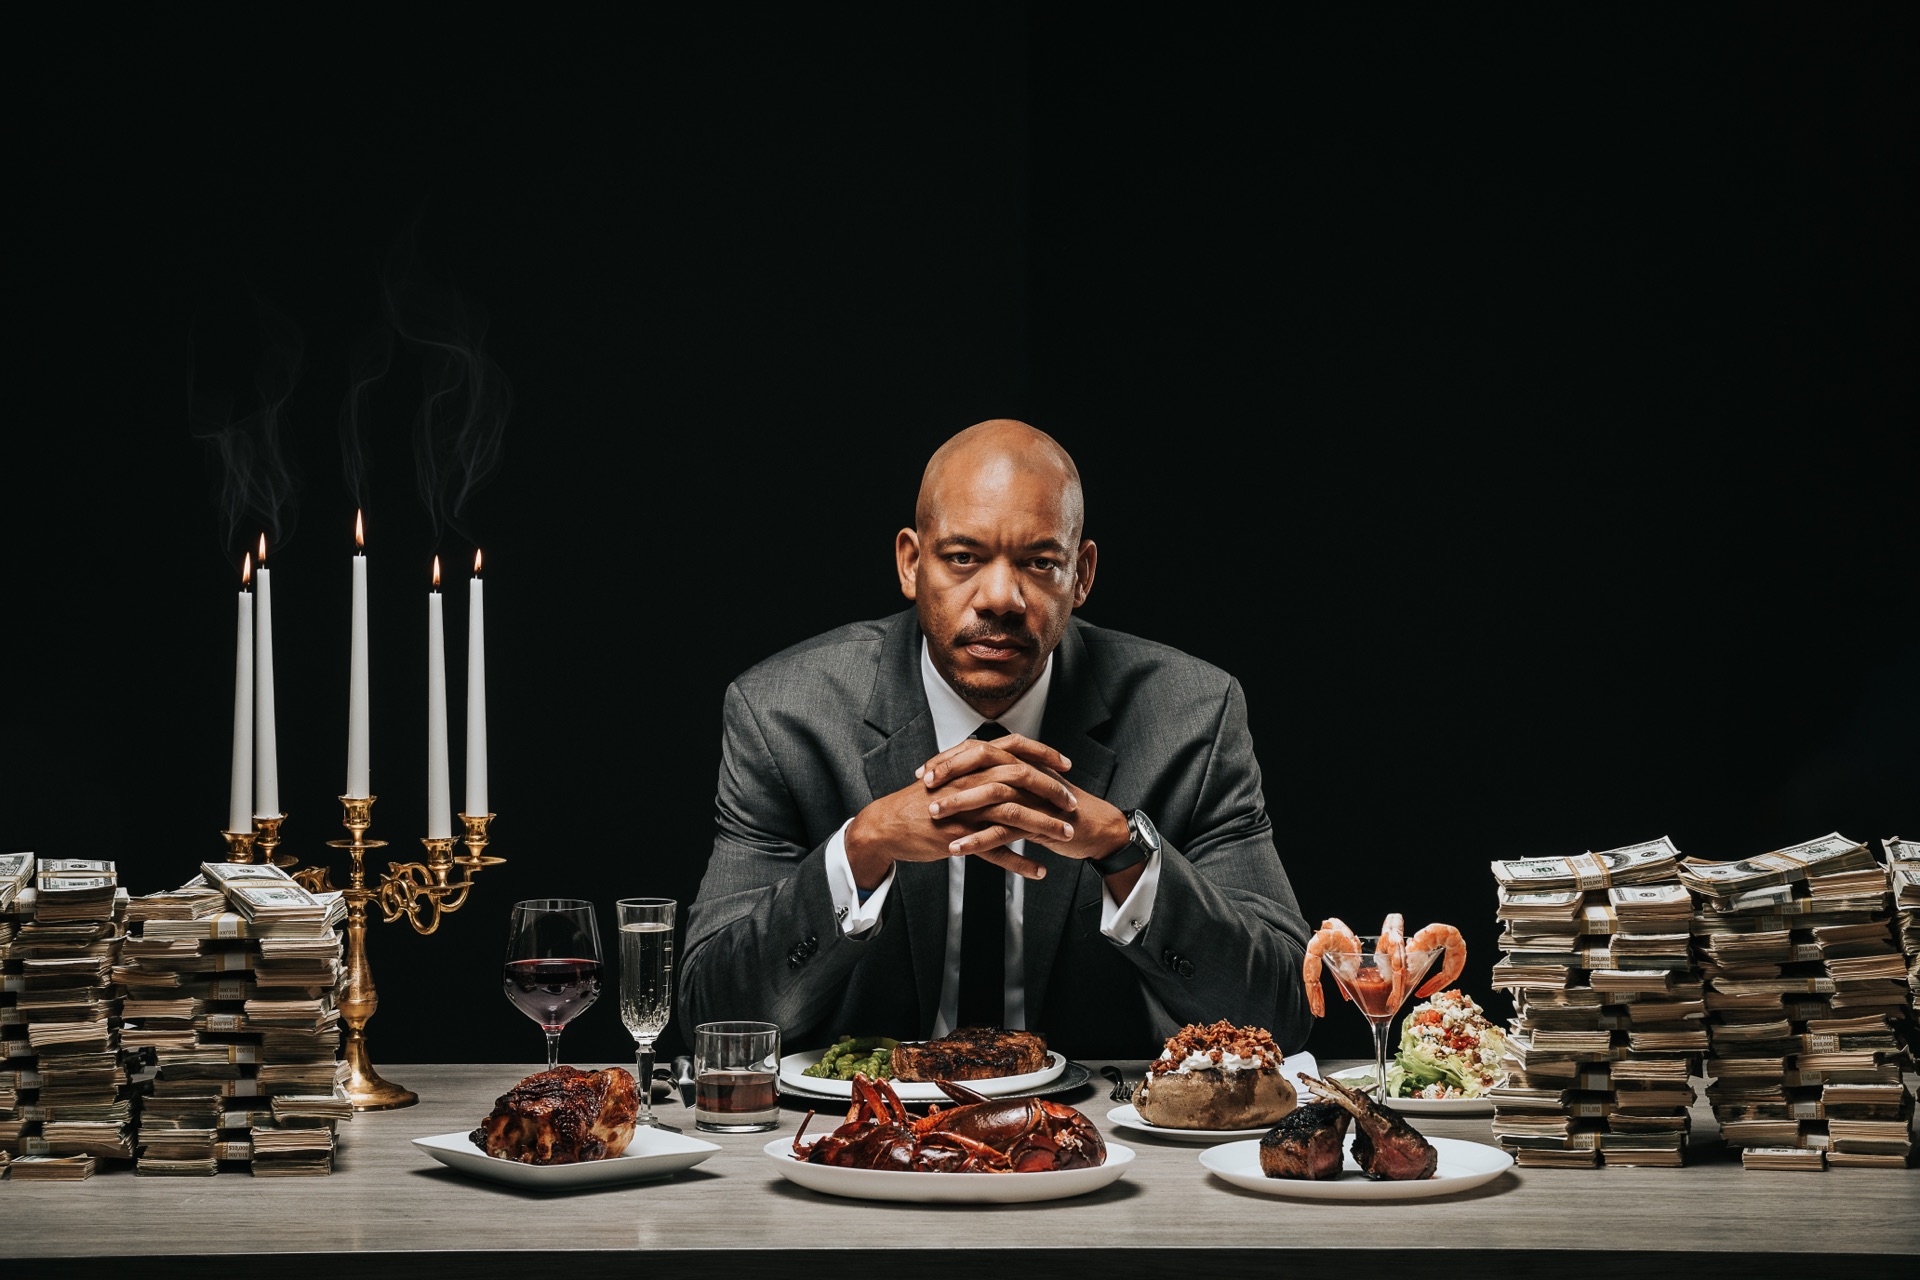 African American male at a table surrounded by exotic foods, cash and a candelabra with lit candles.